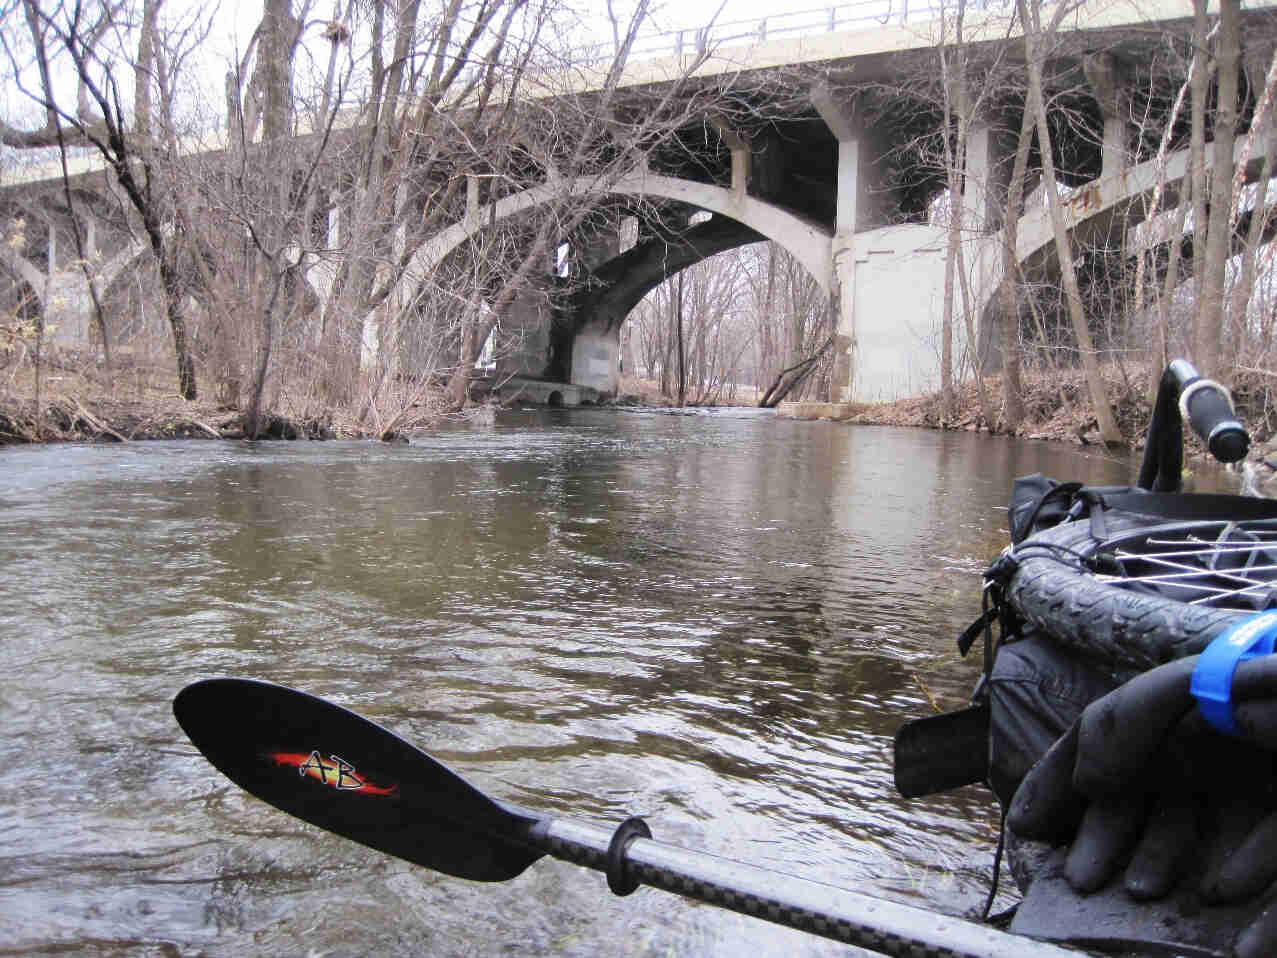 Front view from a raft with a disassembled Surly Travelers check bike, floating down a river and approaching a bridge